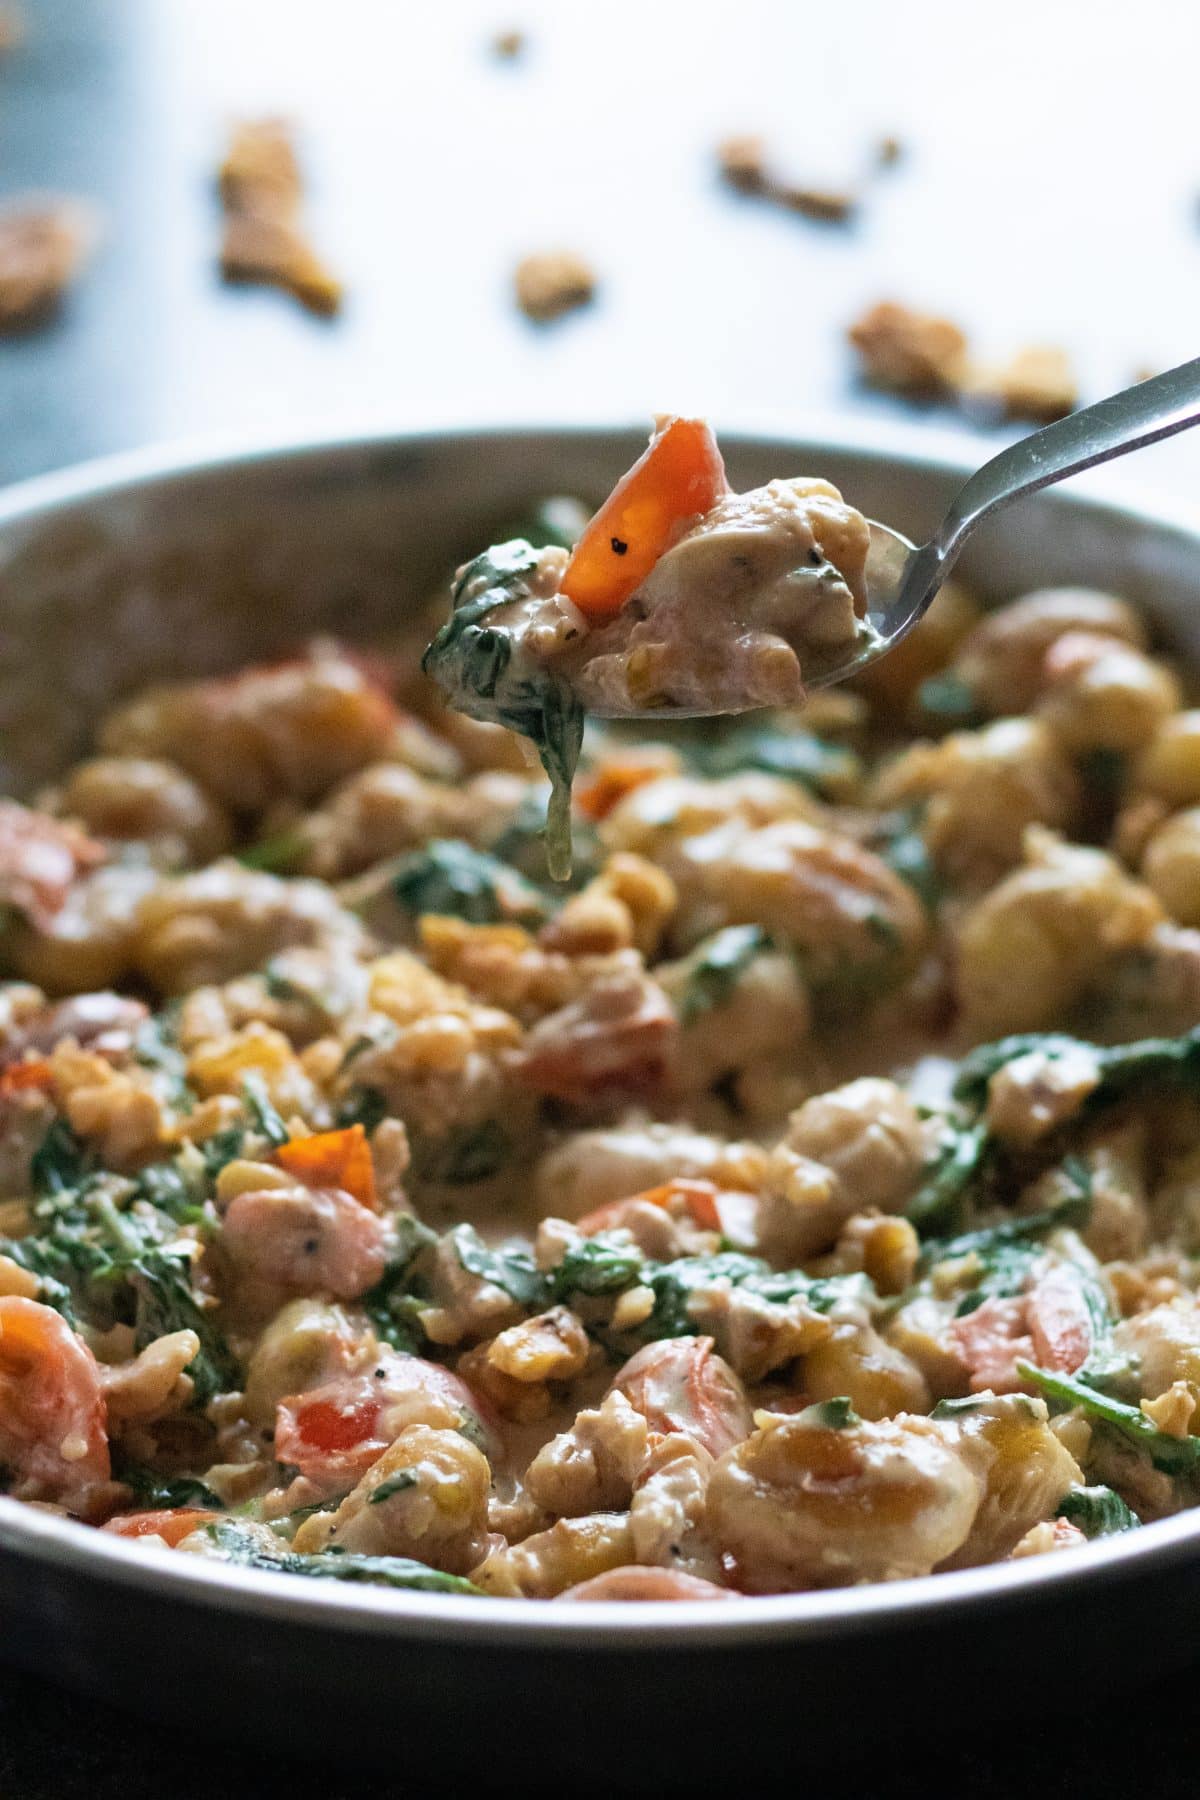 a spoonful of creamy gnocchi with gorgonzola picked up from a pan full of it.